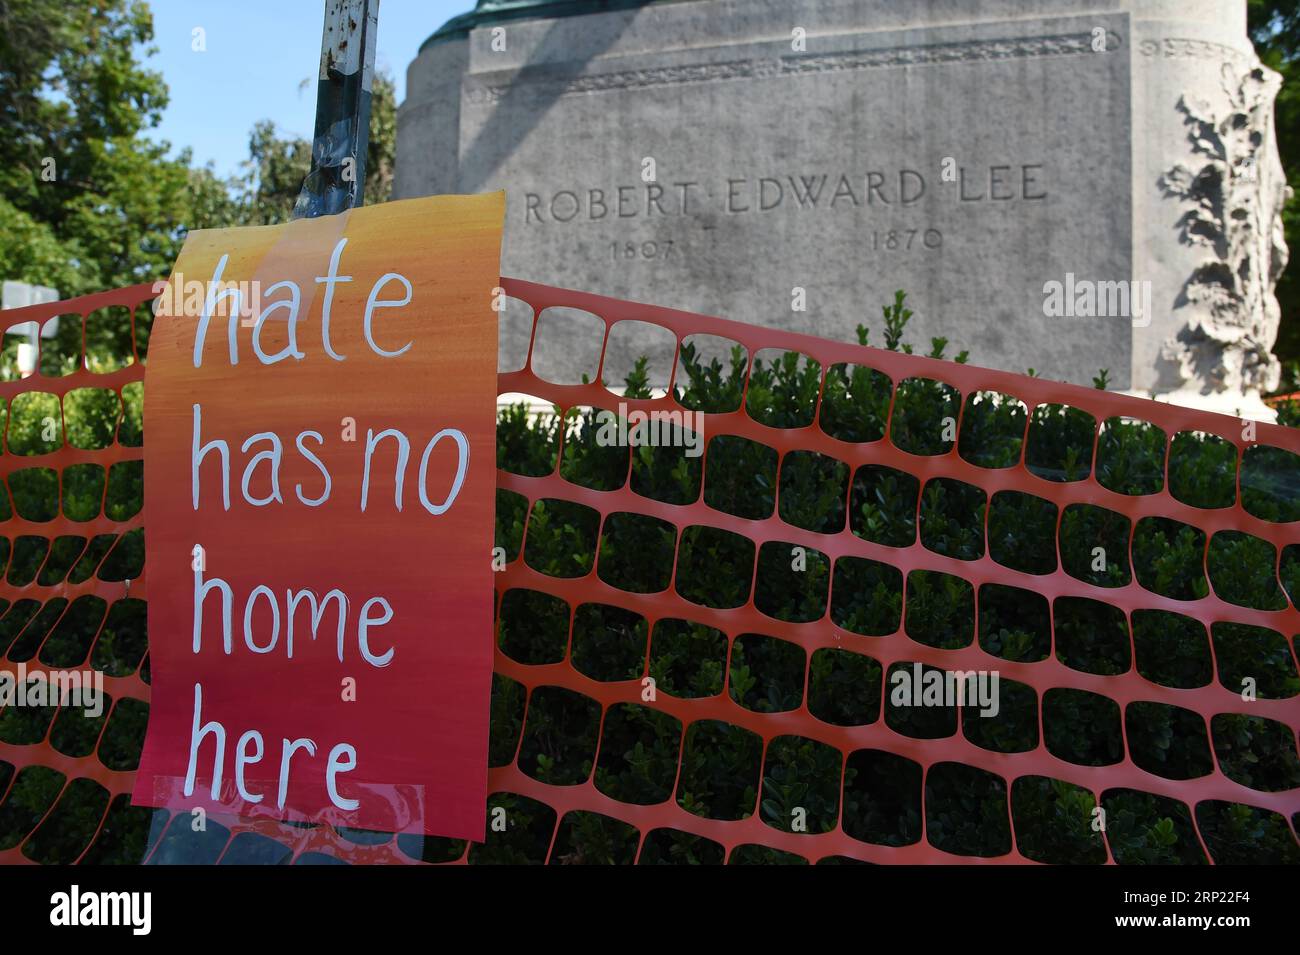 (180812) -- WASHINGTON, Aug. 12, 2018 -- A poster saying hate has no home here is seen in Charlottesville, Virginia, the United States, on Aug. 10, 2018. A year after a white nationalist rally traumatized Charlottesville, in the U.S. state of Virginia, with riots and blood, the city is still healing from the shock. On Aug. 12, 2017, white supremacists and members of other hate groups gathered in Charlottesville for a self-styled Unite the Right rally to protest against the city s decision to remove a Confederate statue before clashing violently with counter-protesters. After the riots were dis Stock Photo